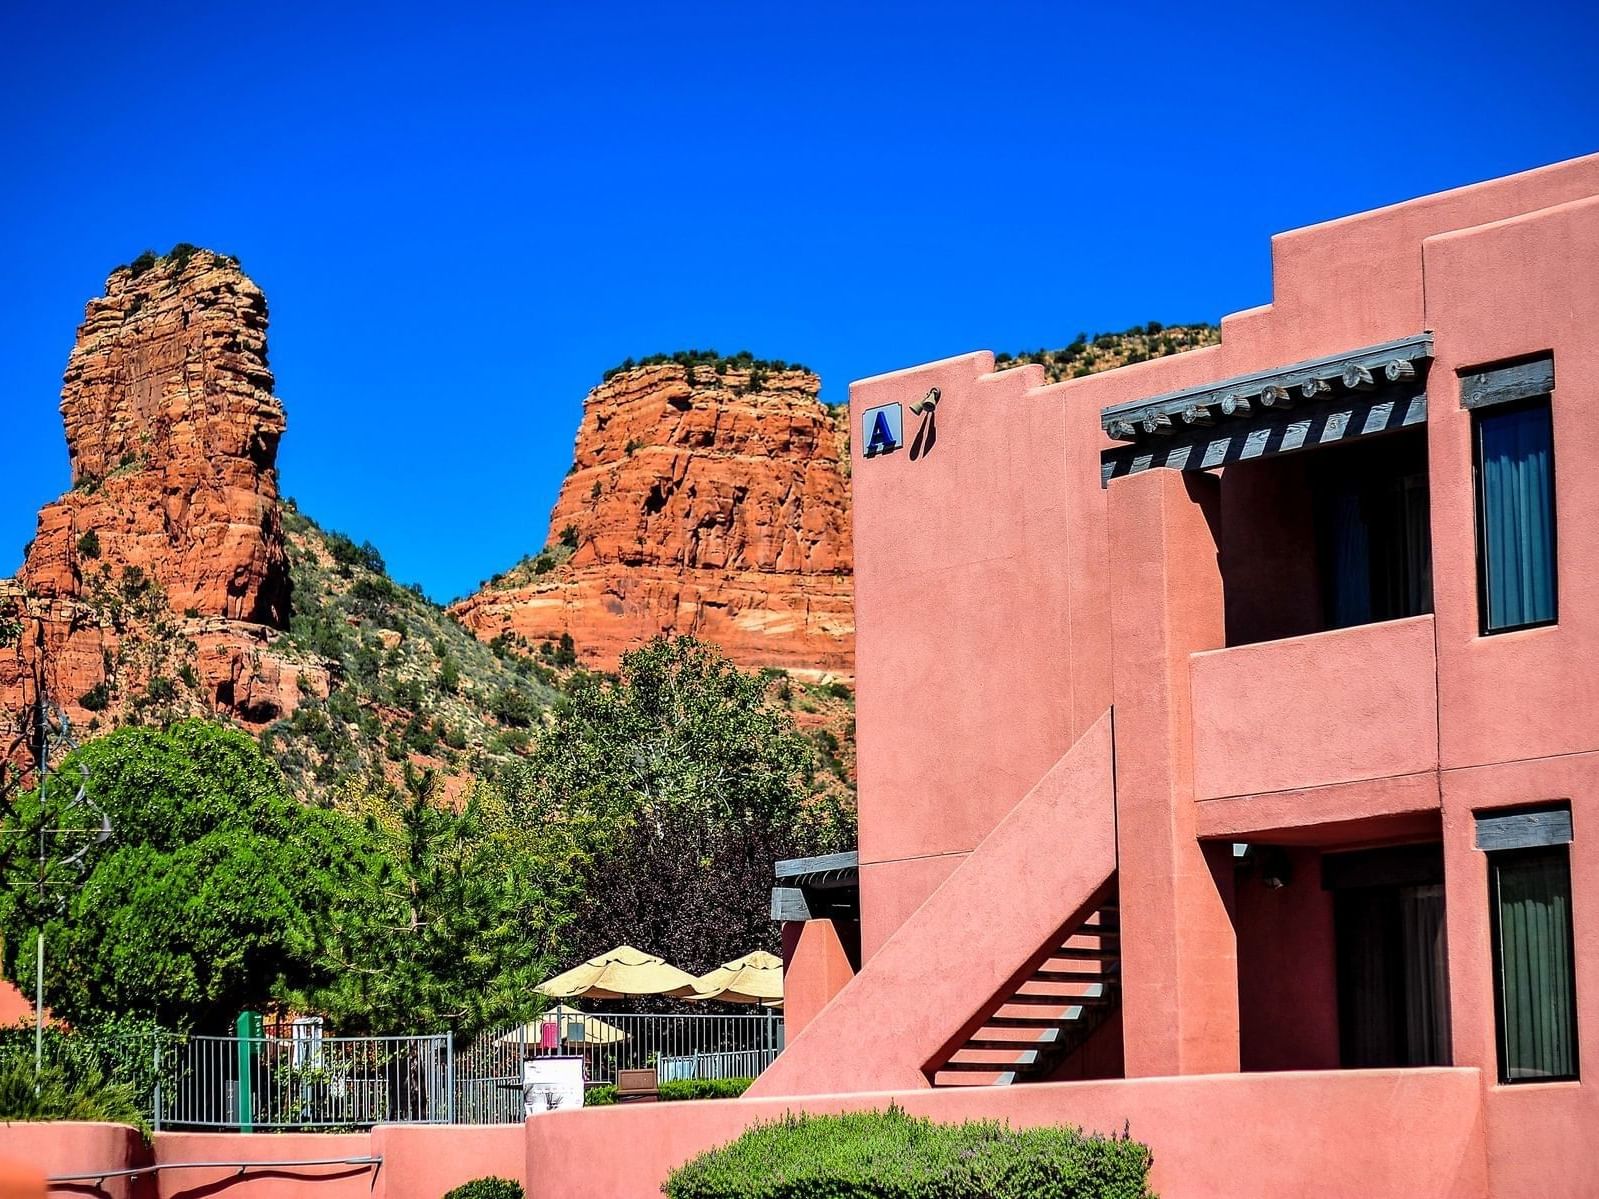 Exterior view of the of Diamond Sedona Portal Hotel with the view of mountains